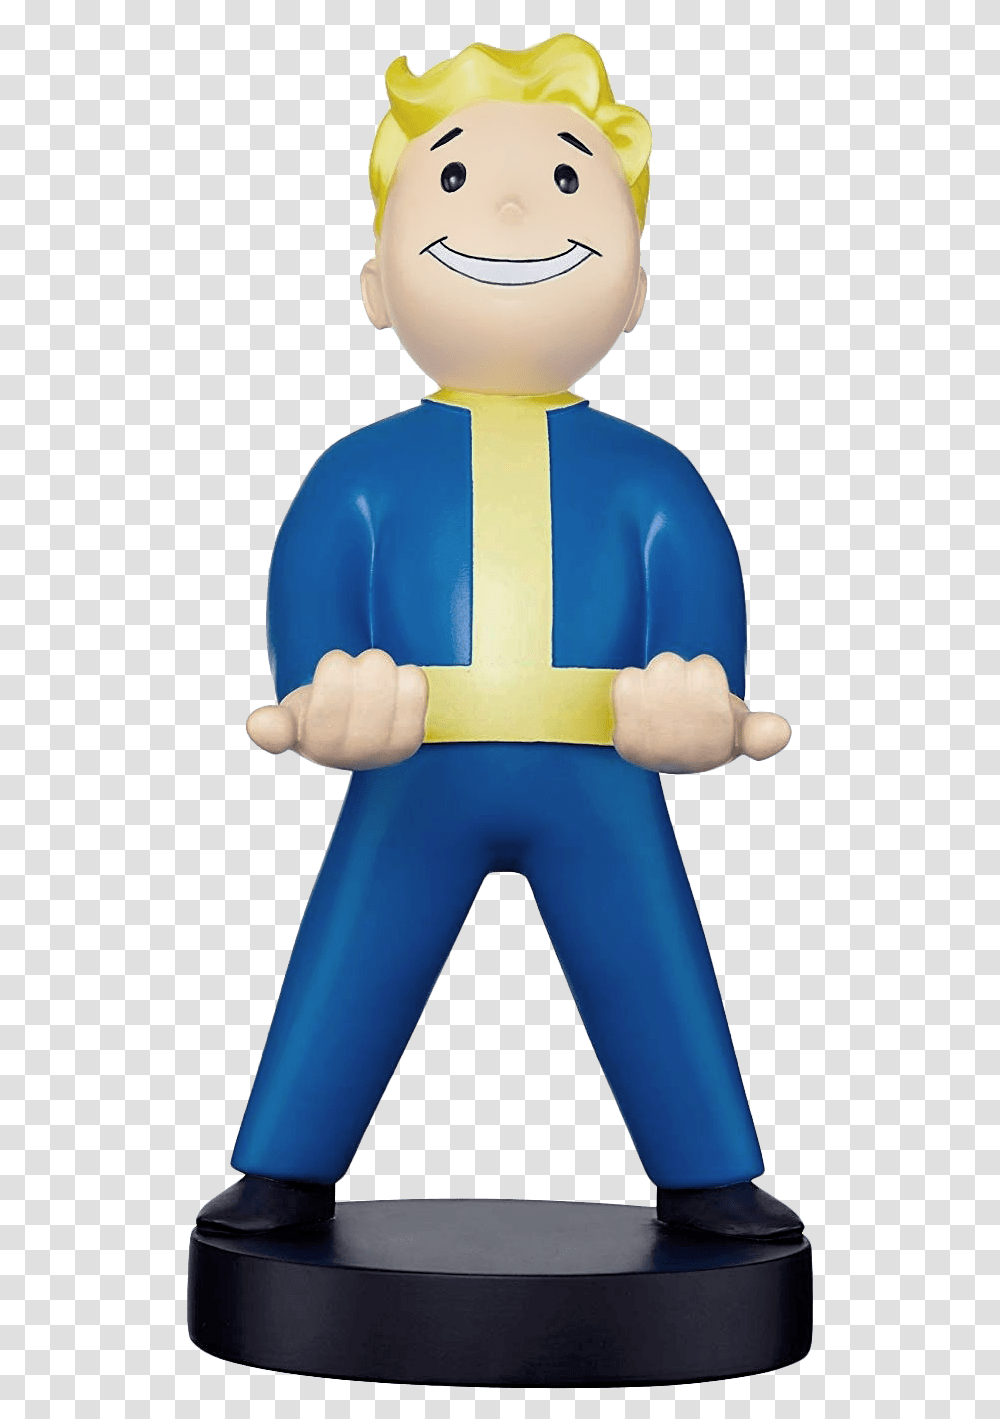 Cable Guys Phone & Controller Holder Fallout 76 Vault Boy New Cable Guys Fallout Vault Boy 76, Toy, Hand, Art, Inflatable Transparent Png